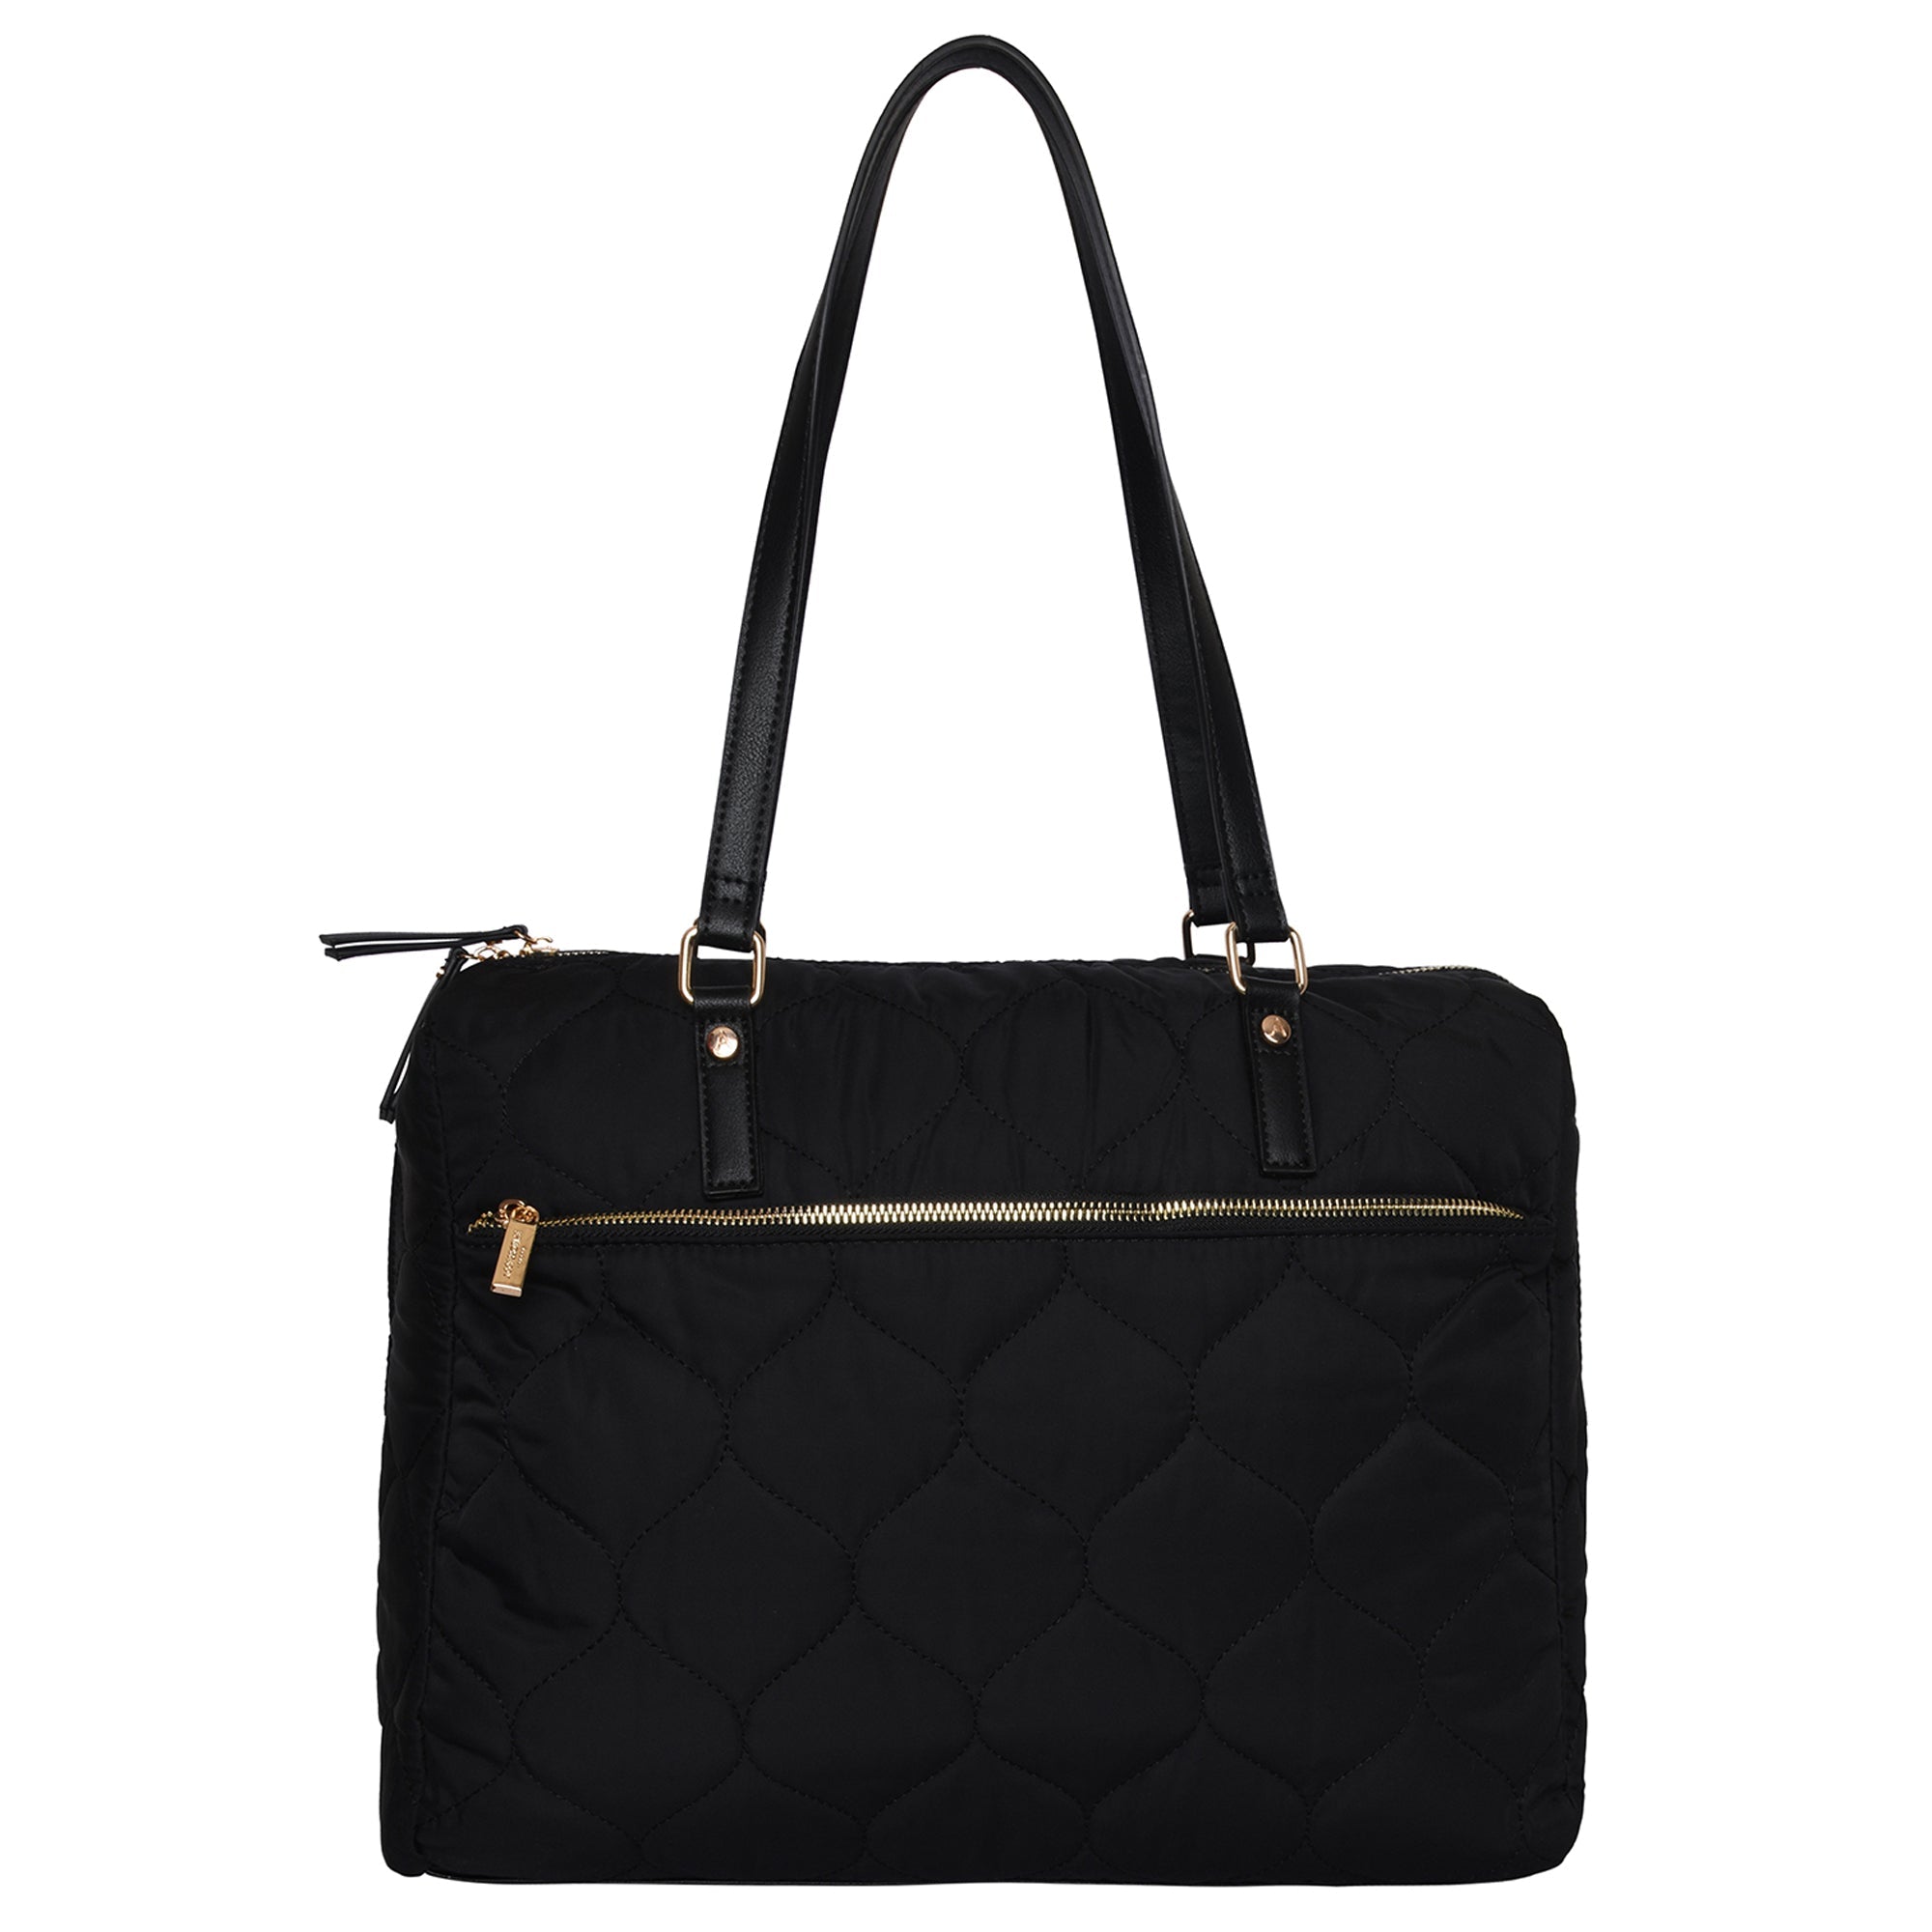 Accessorize London Women's Faux Leather Black Emmie Quilted Weekender Bag